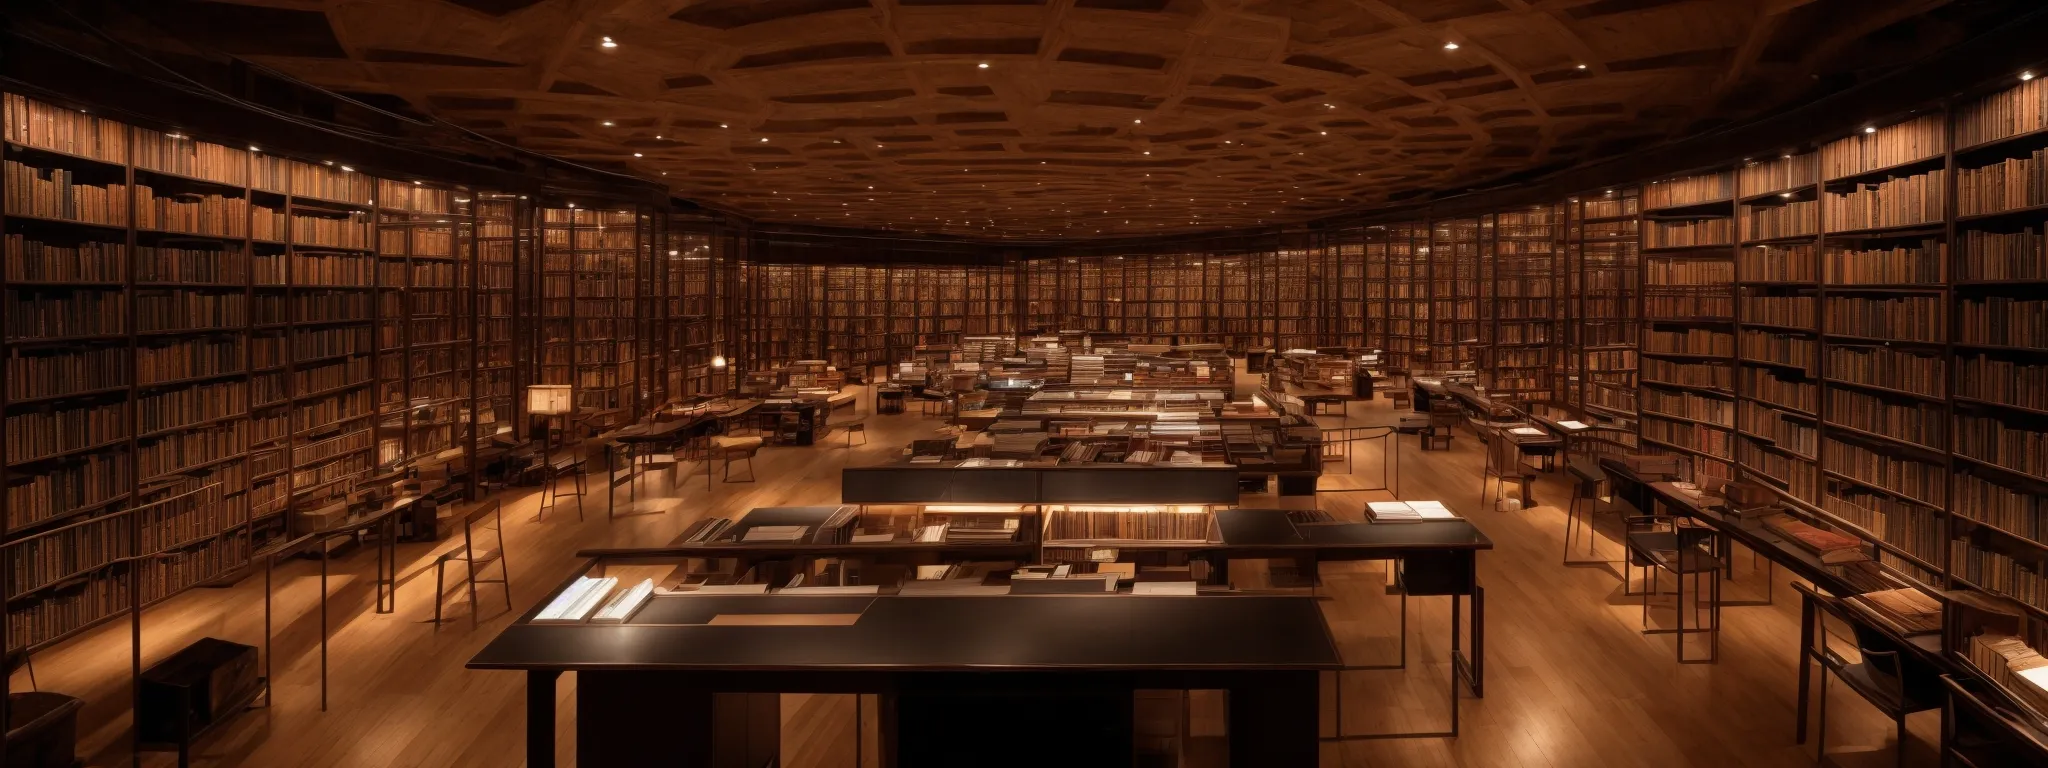 a panoramic view of a vast library with endless rows of books and a central aisle leading towards a glowing screen showcasing graphs and keyword data.